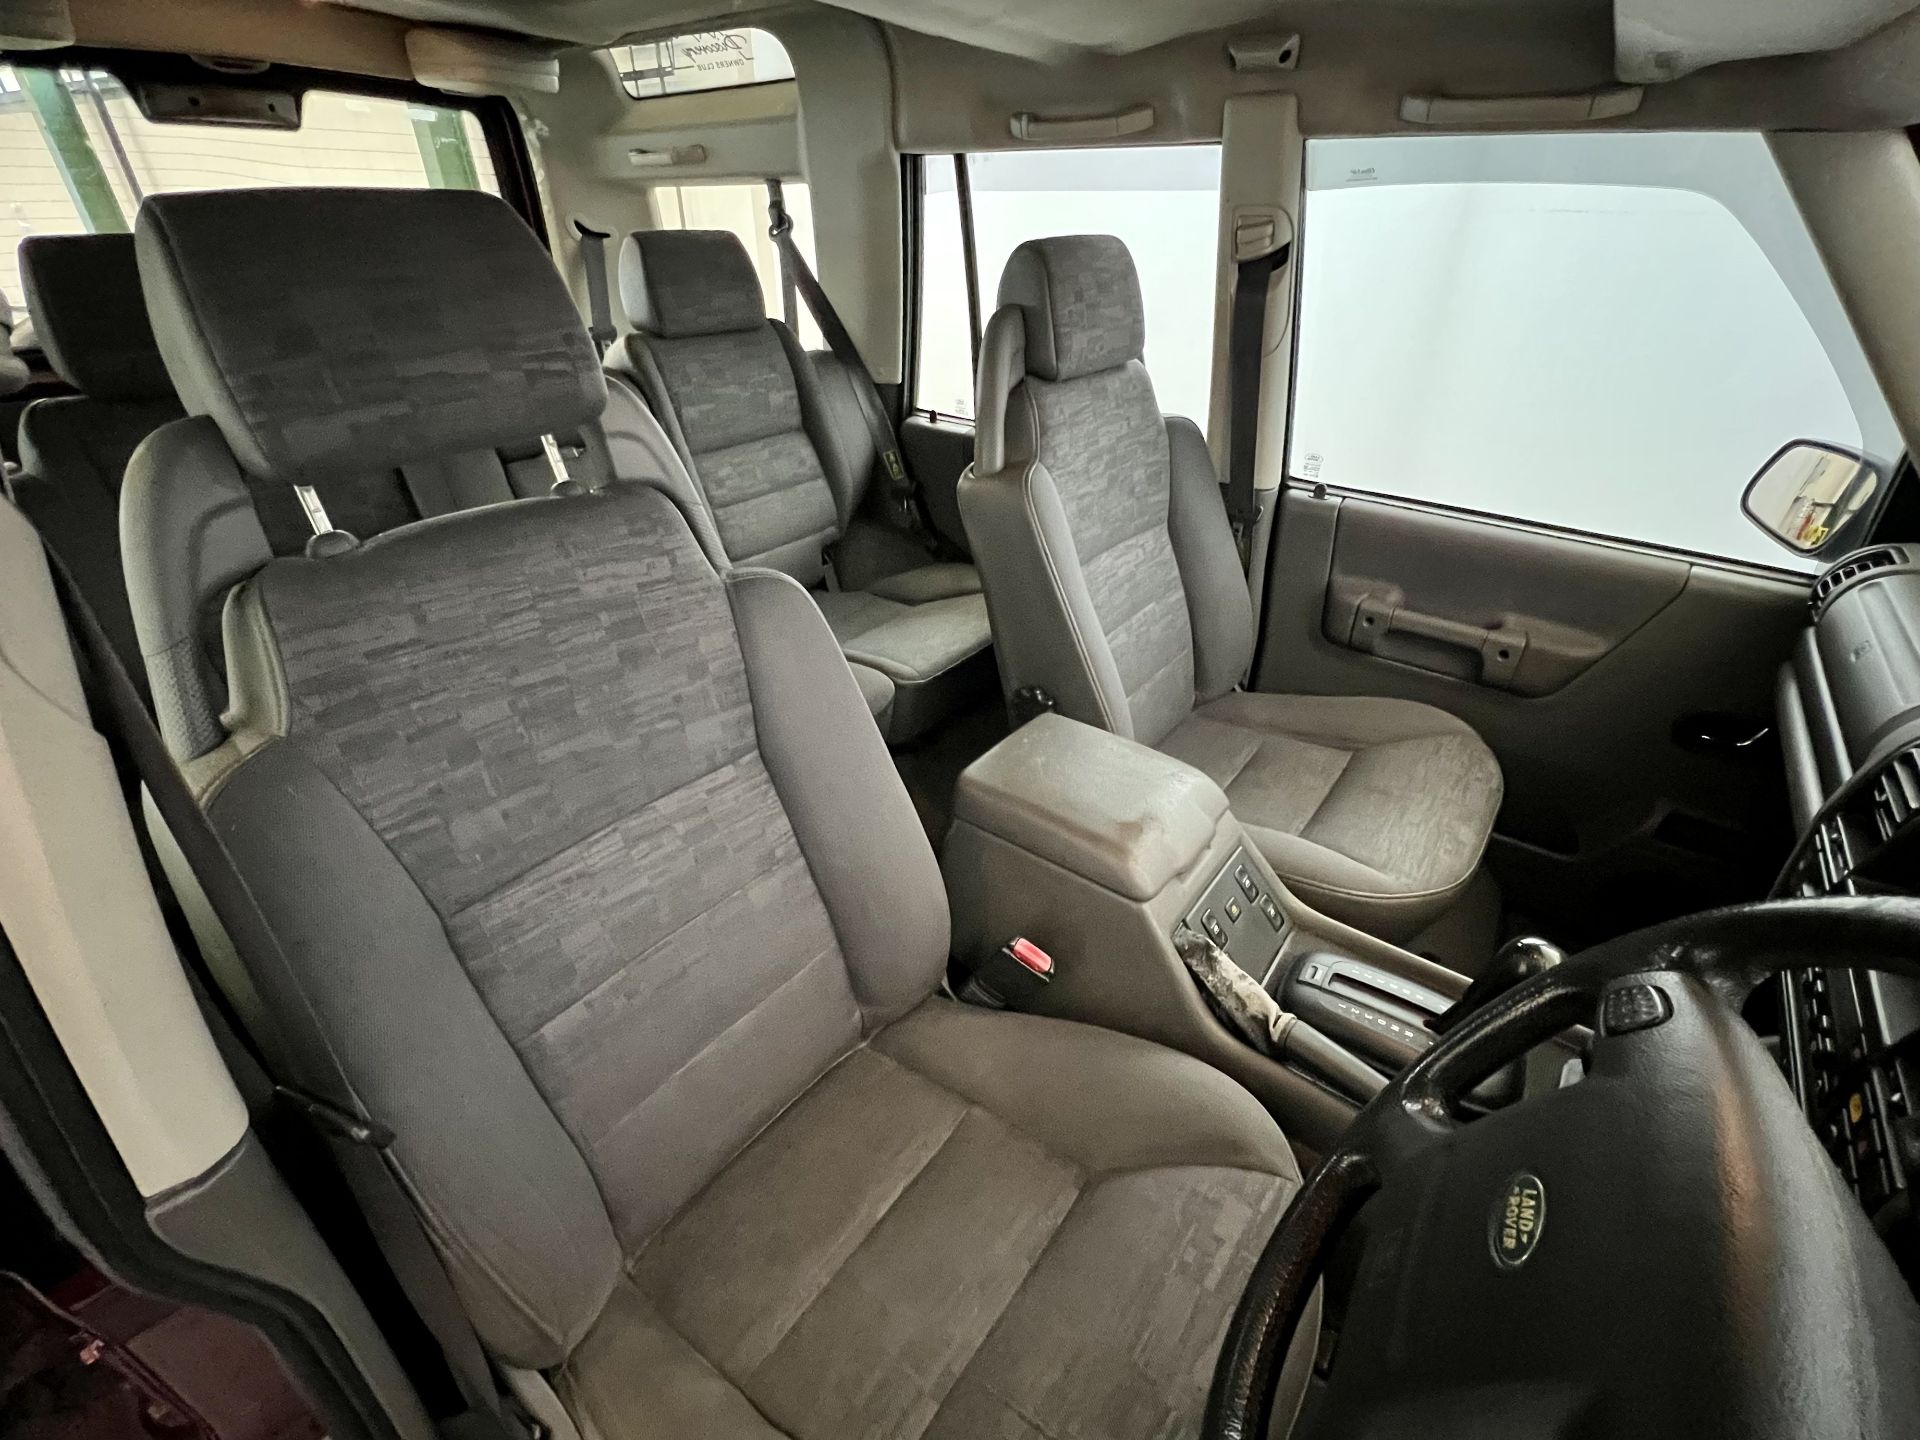 Land Rover Discovery - Image 20 of 35